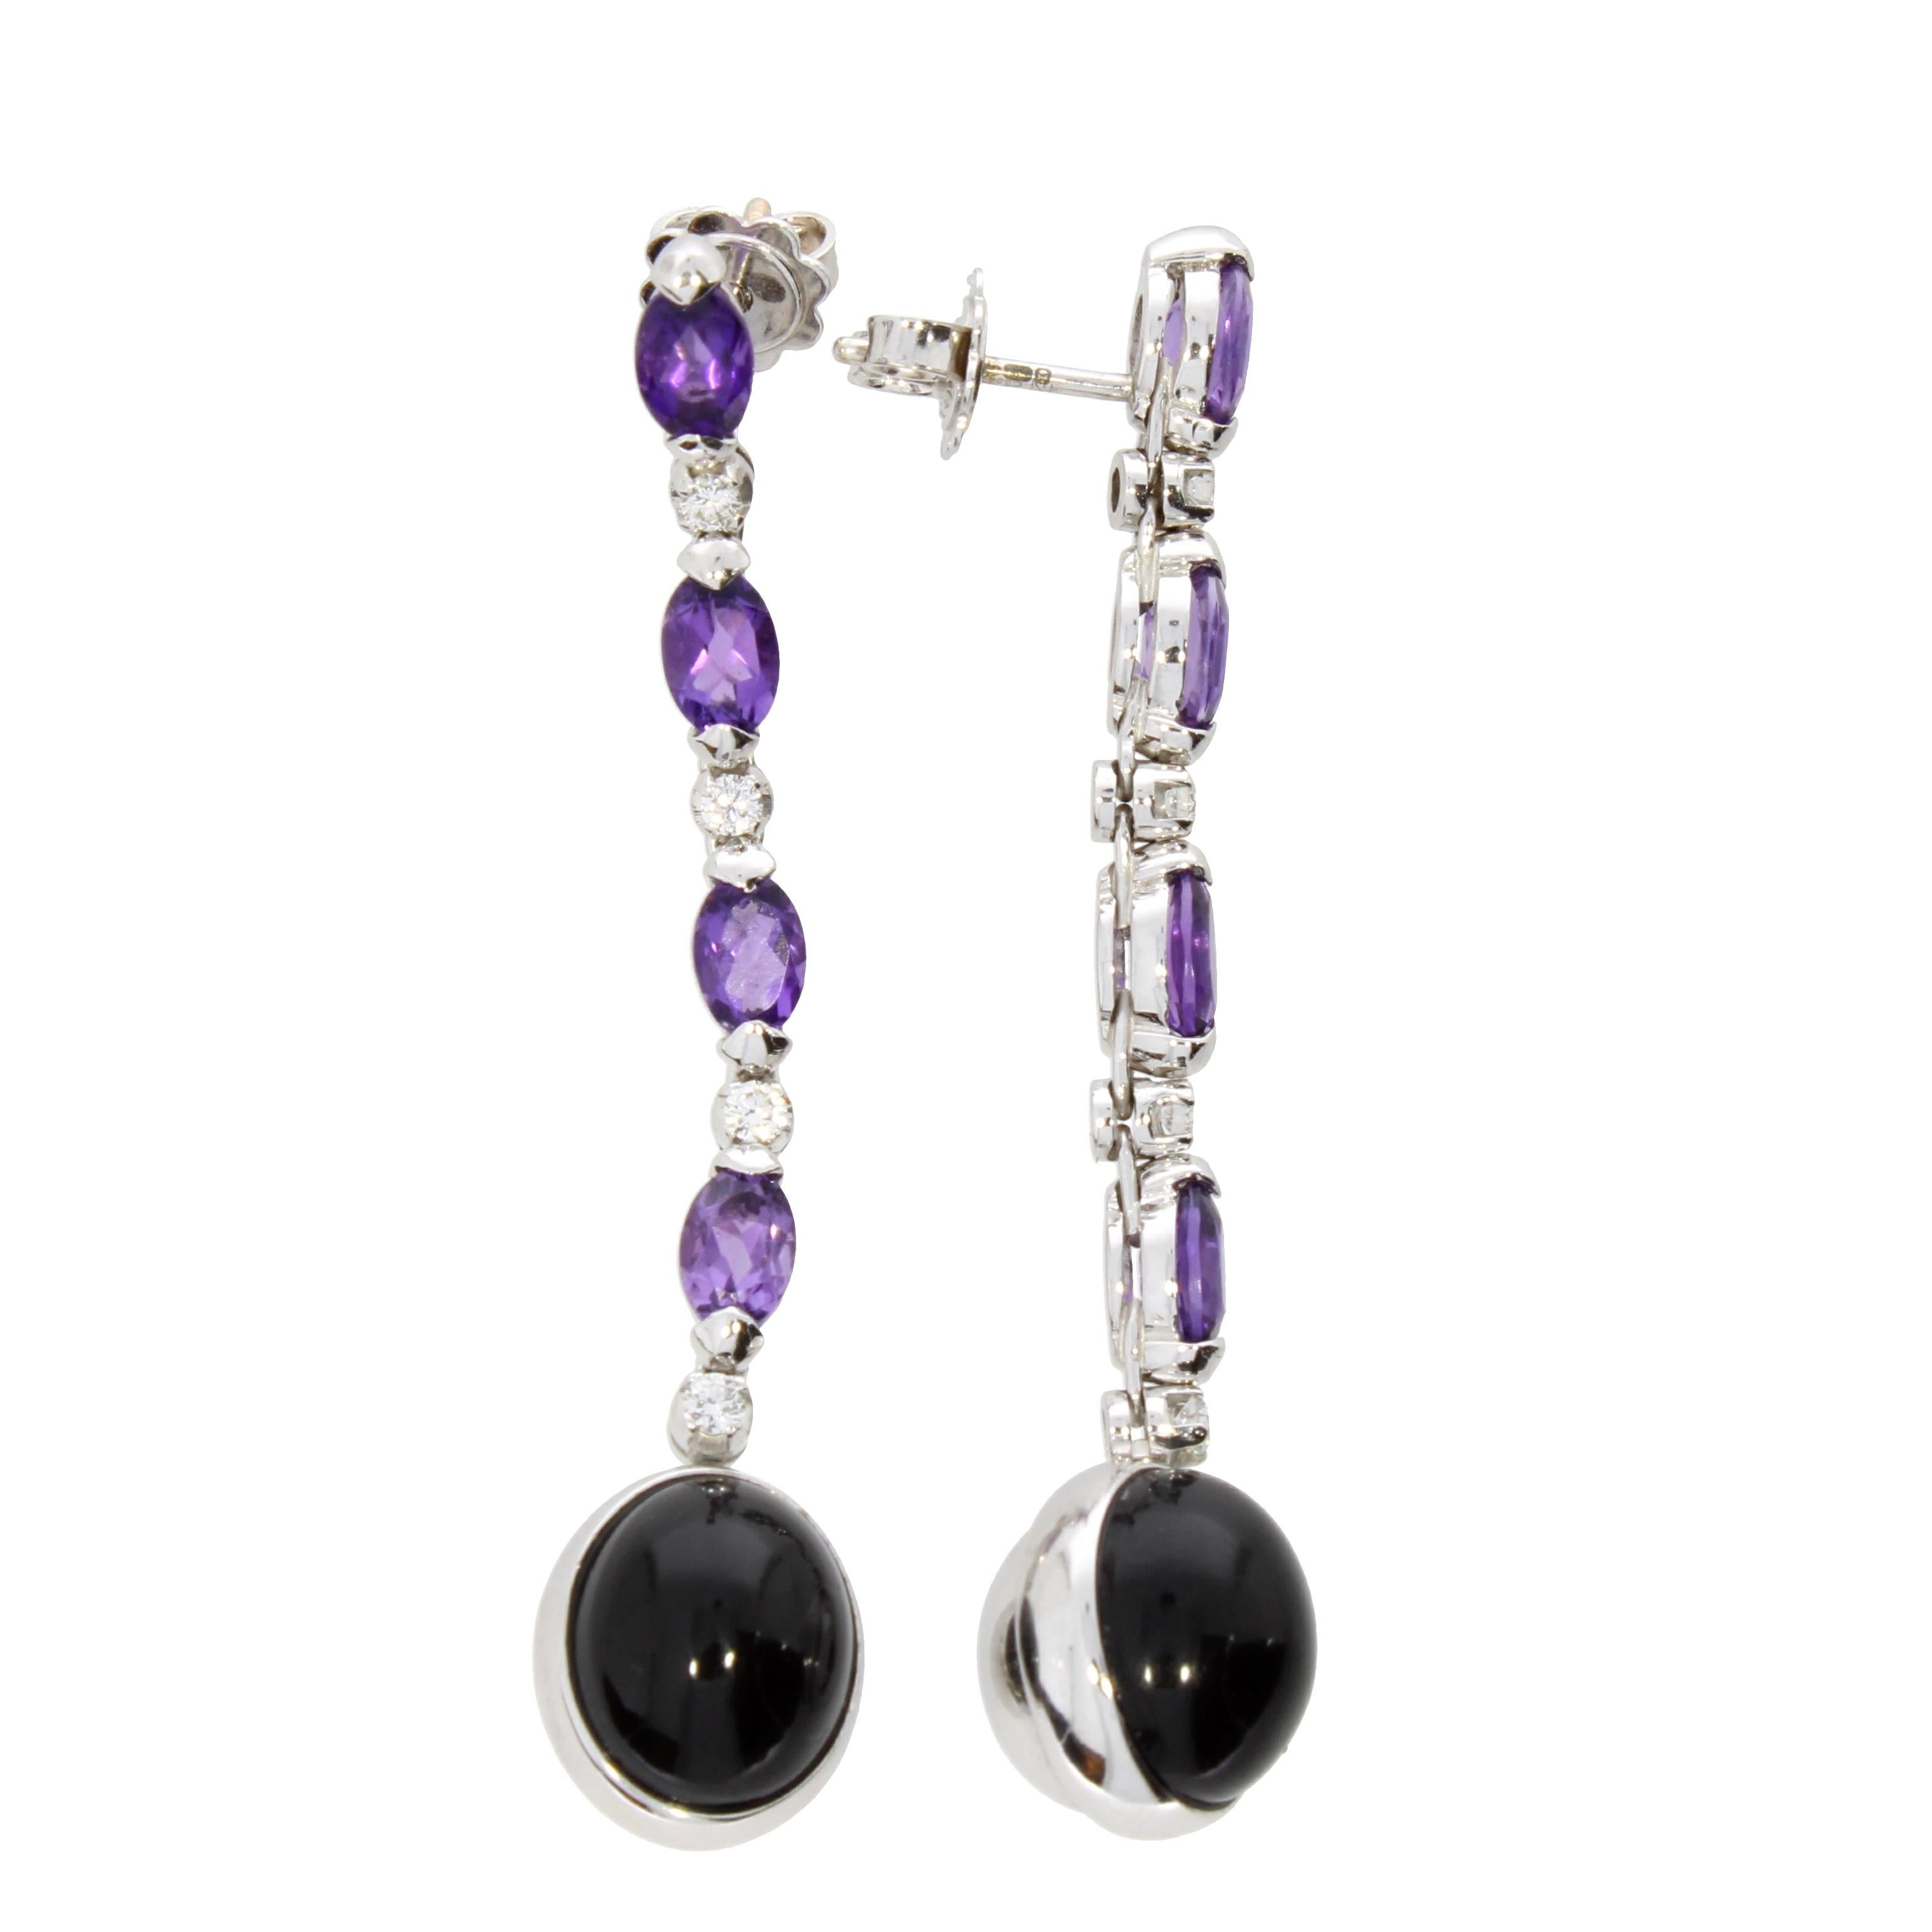 A captivating pair of rotating black onyx pendants delicately suspended on an elegant arrangement of oval cut amethysts and brilliant cut diamonds.

The Earrings are simply elegant and wearable all day long with a hight neck jumper or a white shirt